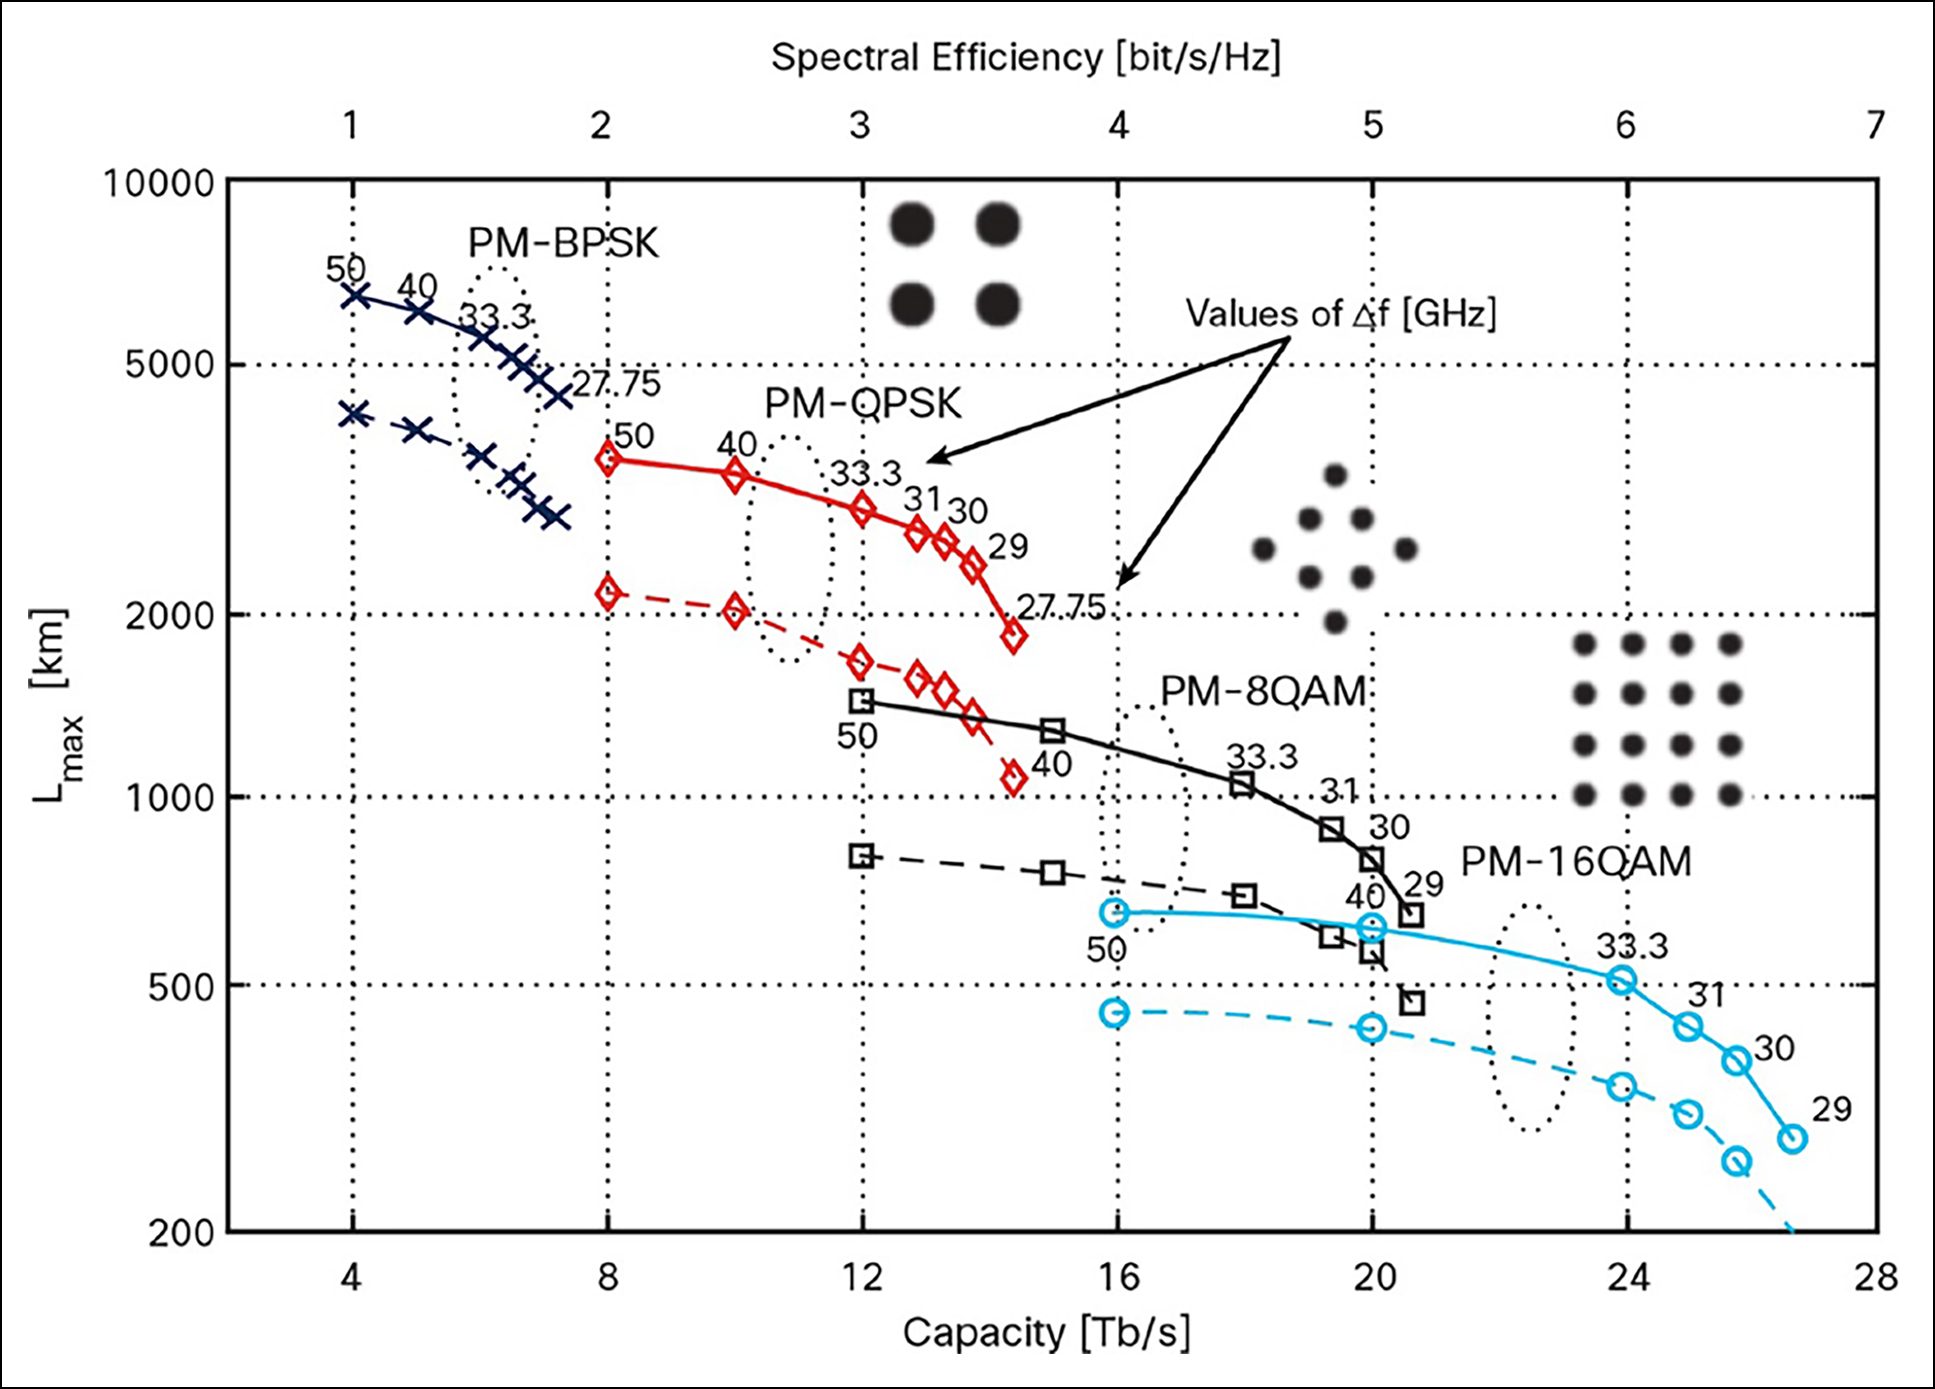 The chart provides capacity (Tbps) and Spectral Efficiency (bit/s/Hz) VS Maximum Reach (Lmax) for different modulation schemes. SMF is represented in solid lines and LEAF is represented in dashed lines.